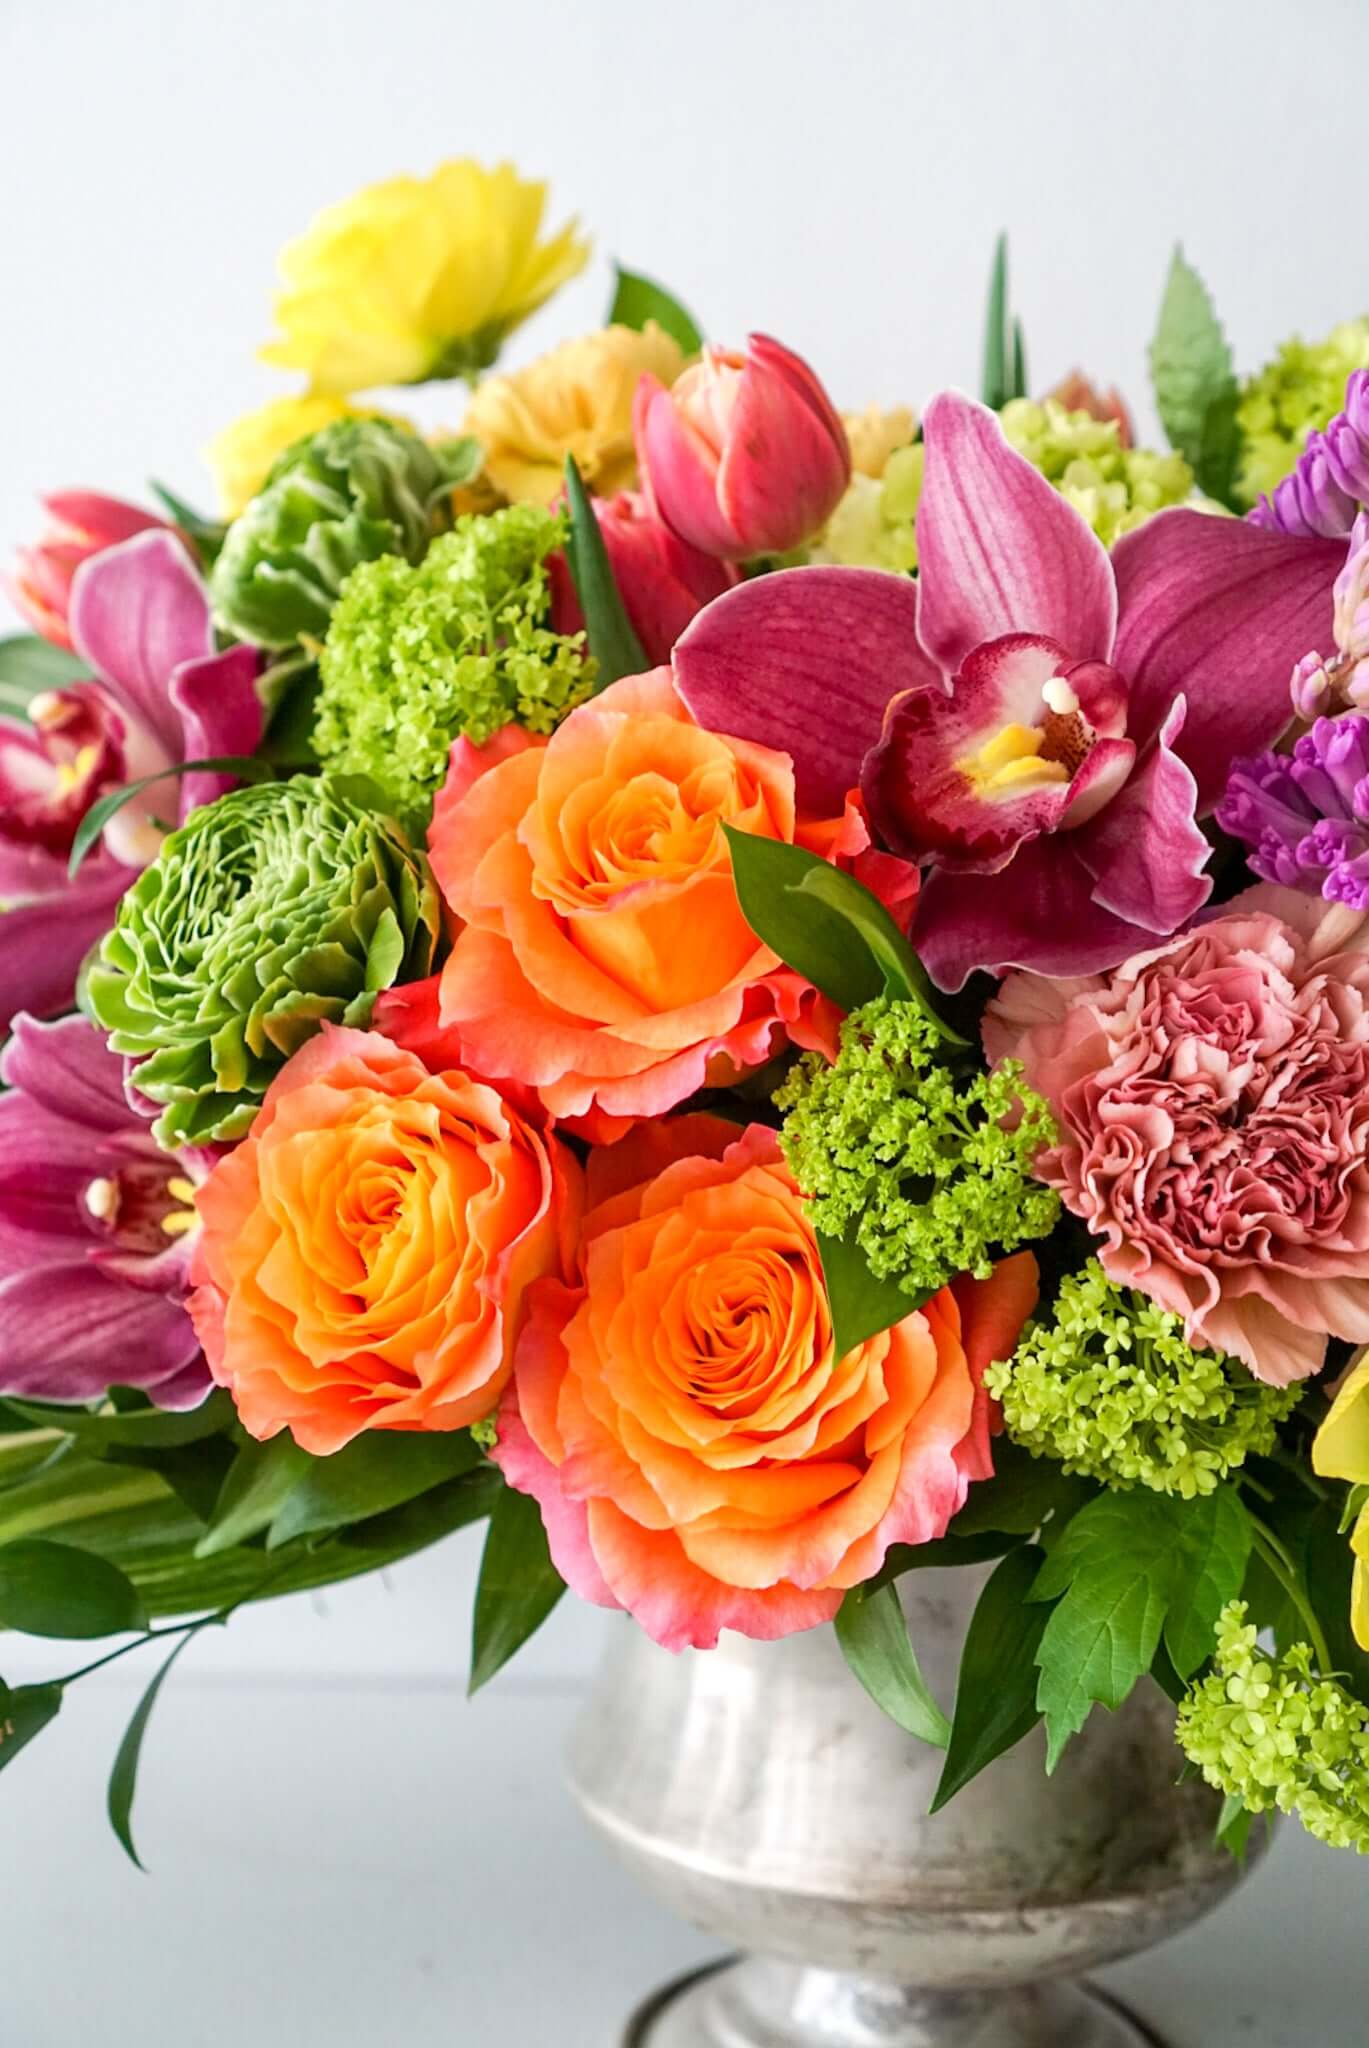 A sophisticated and tasteful arrangement for the fall season. The Autumn Festival filled with autumn elements include Free Spirit roses, dahlias, hyacinth, cymbidium orchids...The Flower Nook, Toronto Florist